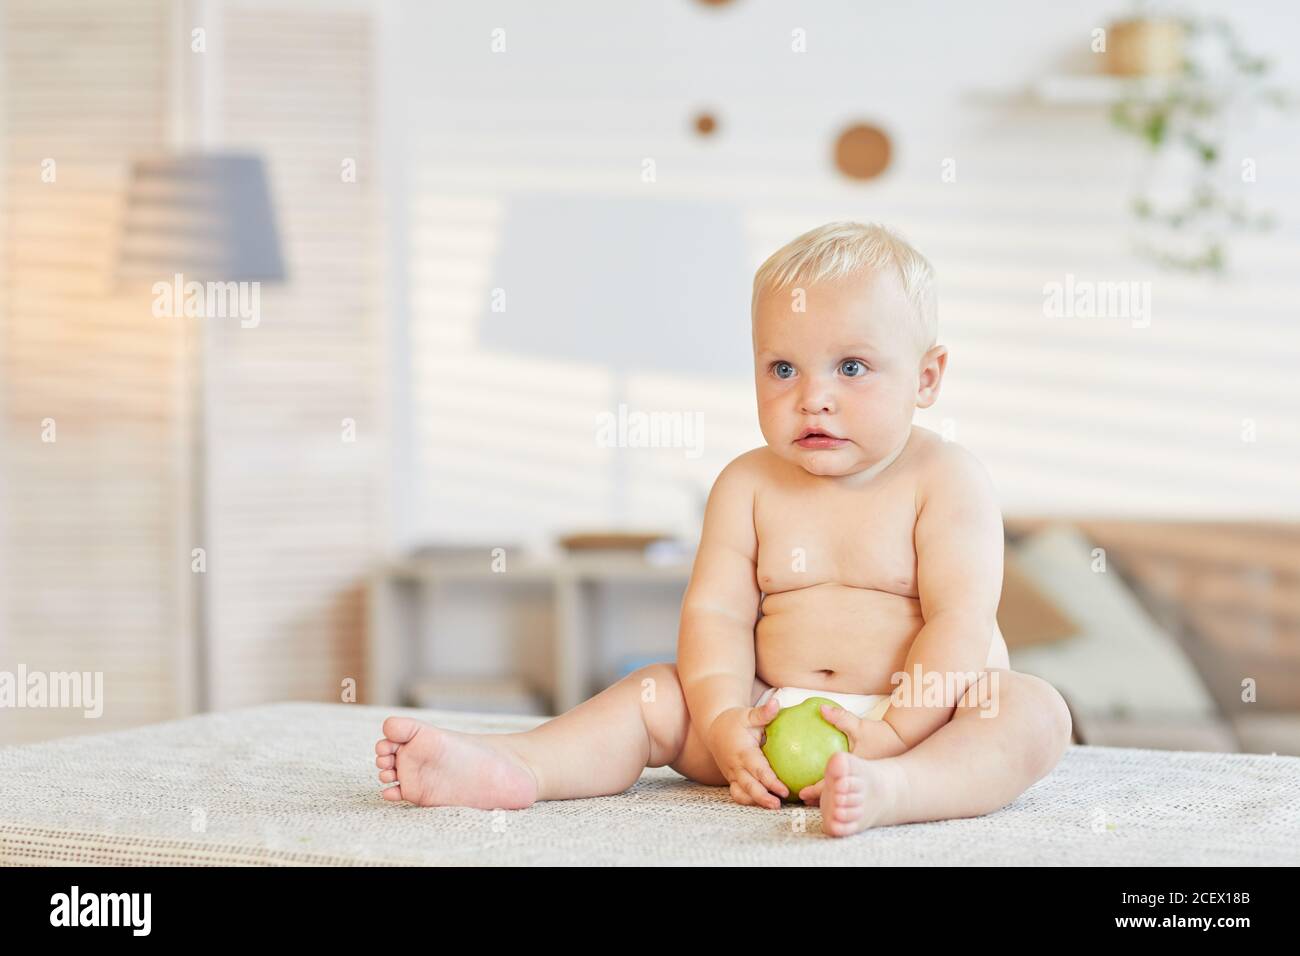 Cute little baby sitting on table in living room holding fresh green apple looking away, copy space Stock Photo